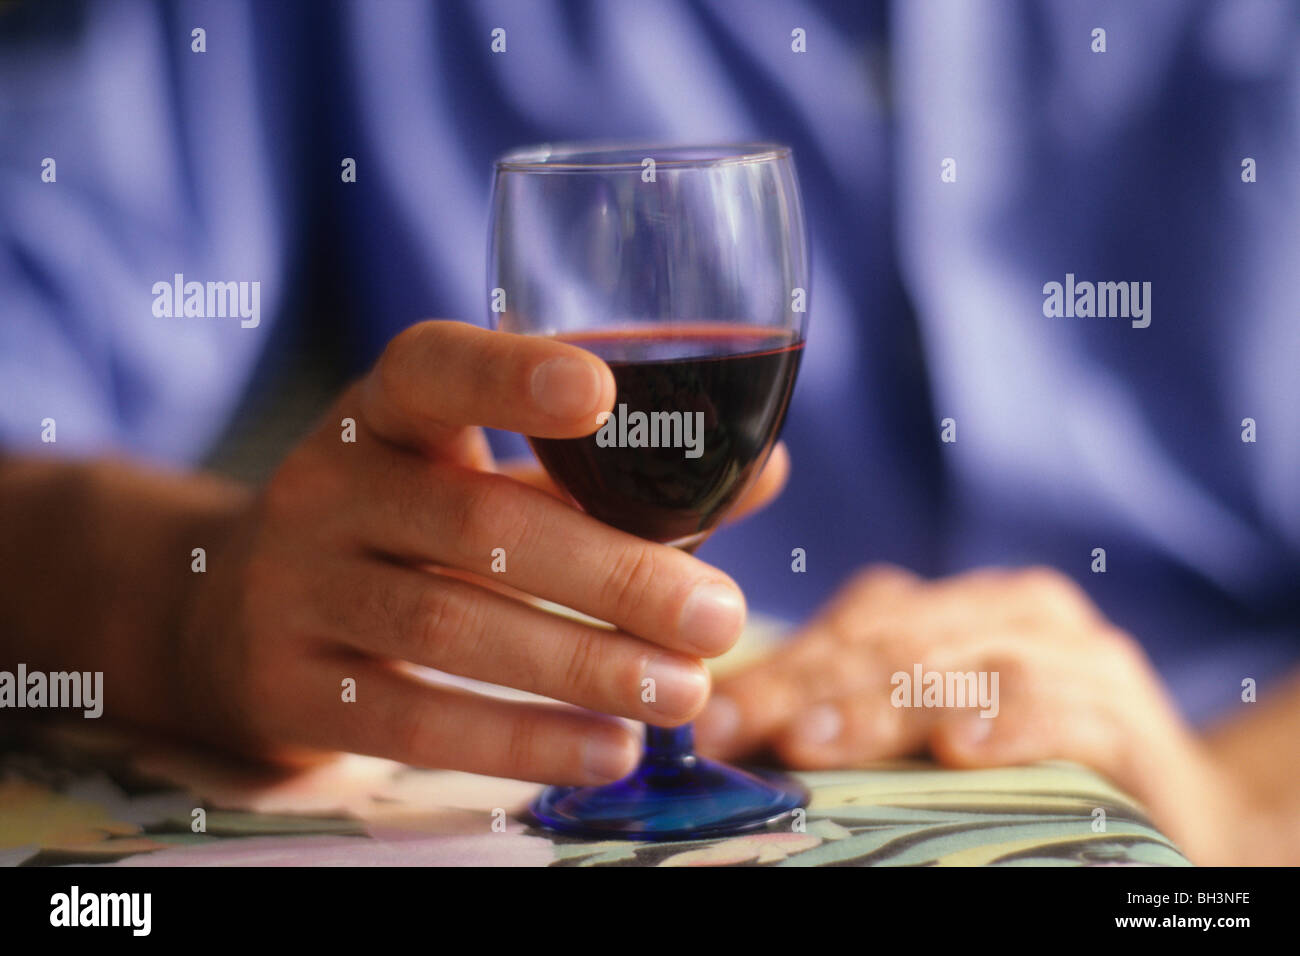 Man holding a glass of red wine Stock Photo